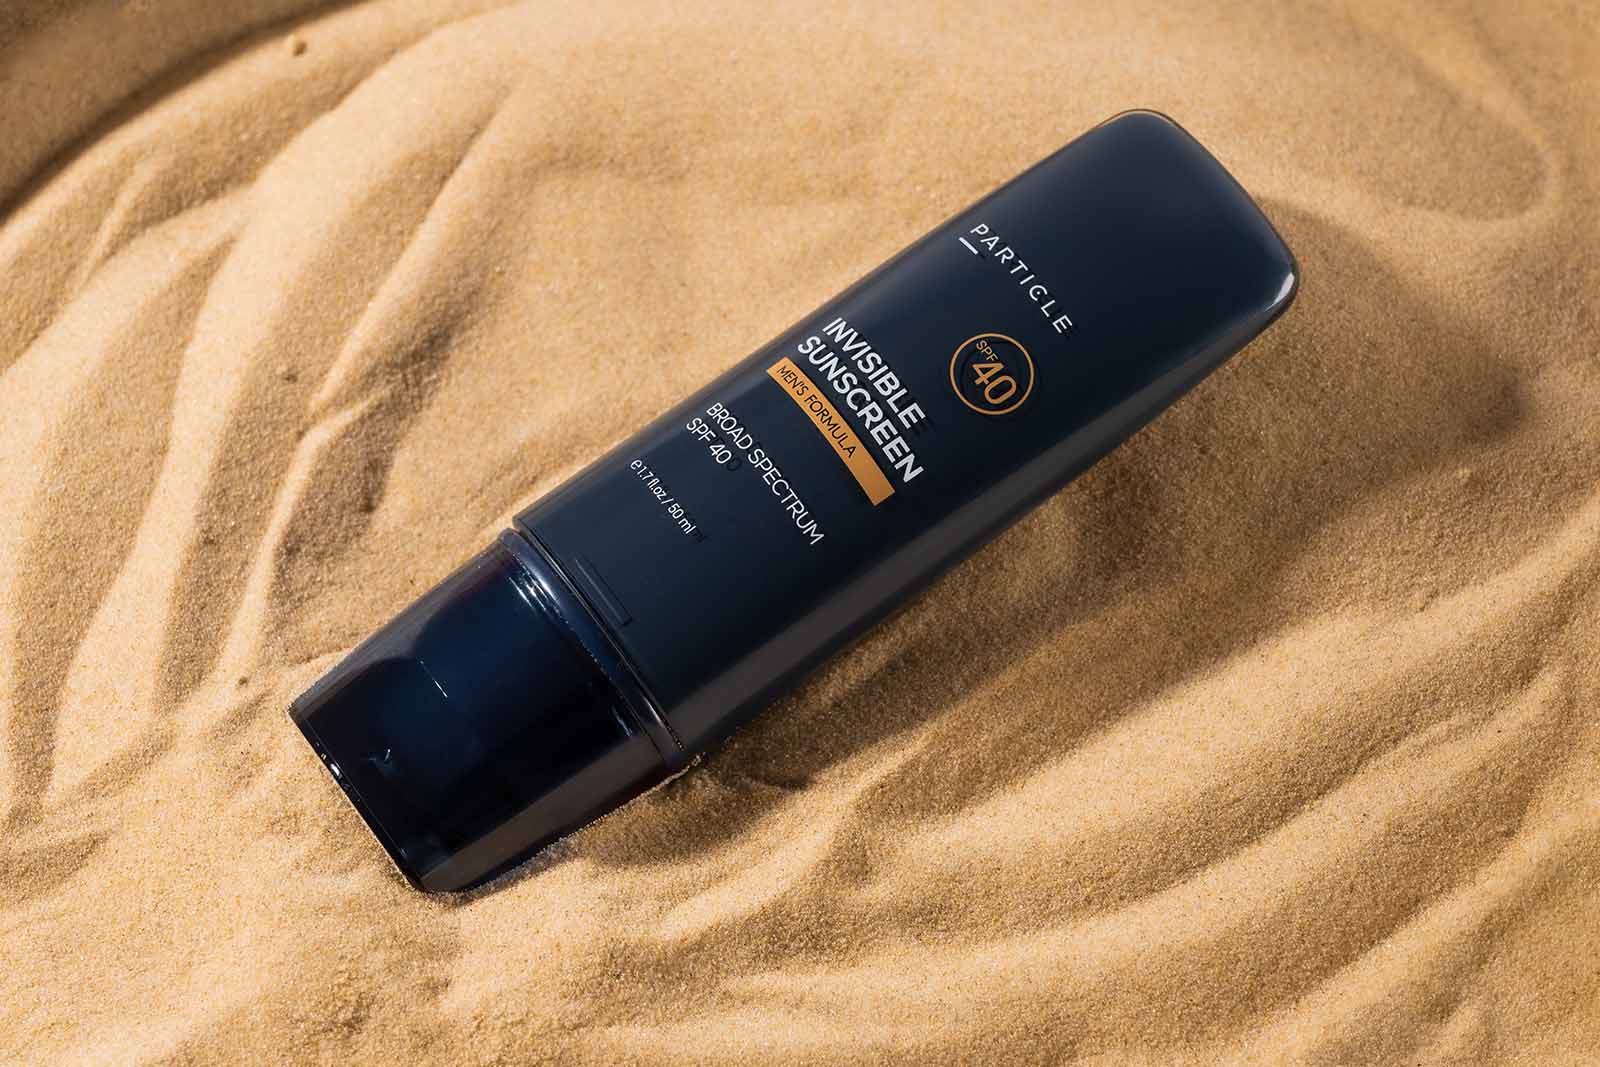 The Science Behind Particle's Invisible Sunscreen And Why It Should Be The #1 Choice For Every Man